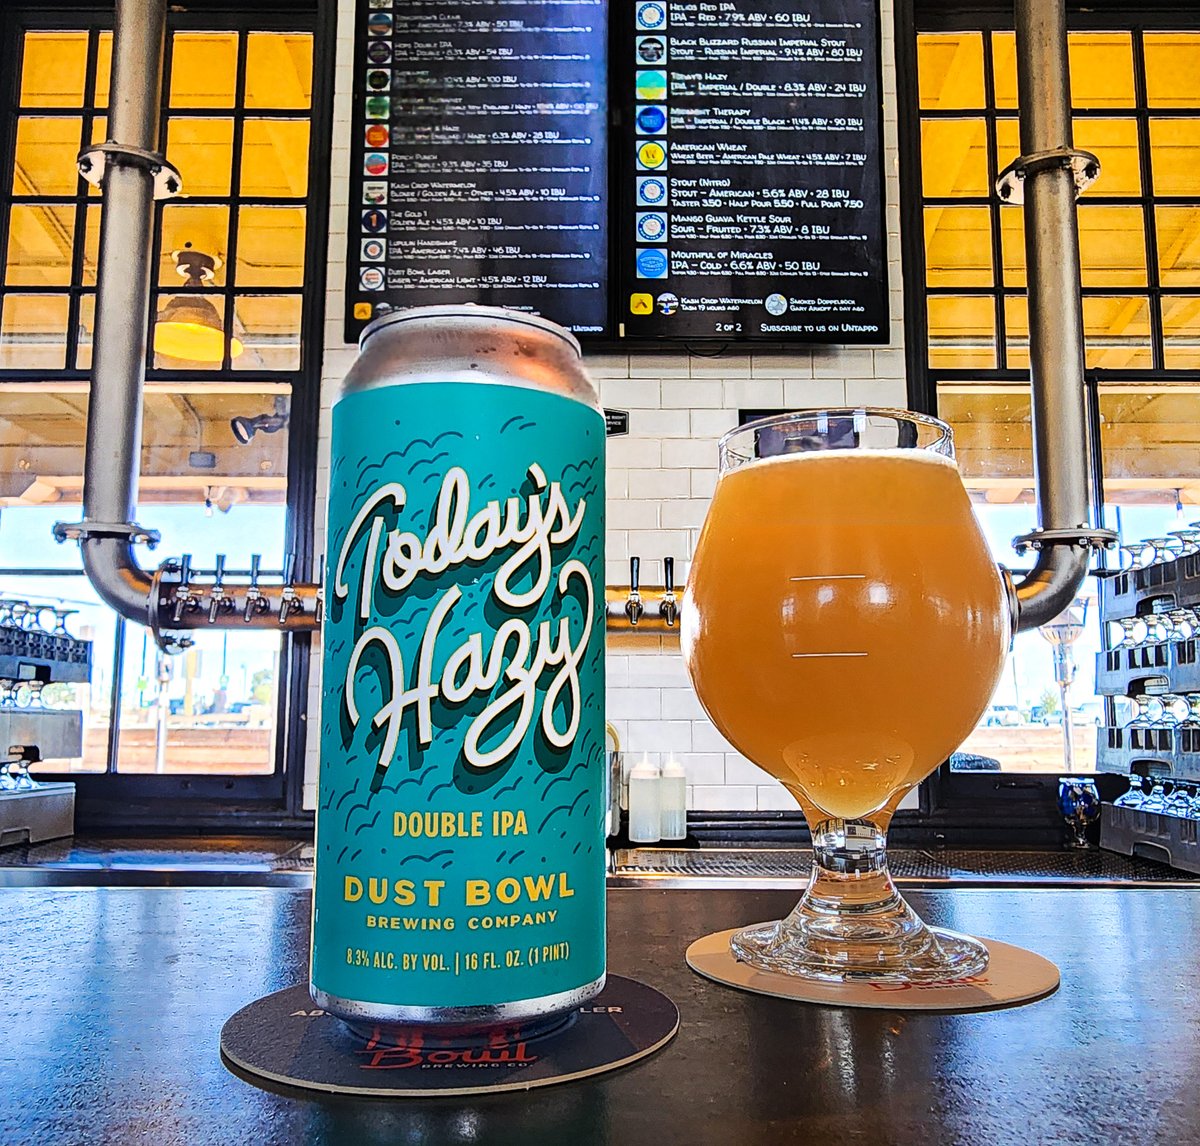 Double the Haze, Double the Fun! 🤪✌🏻

Tap into weekend vibes with Today's Hazy IPA – a burst of sweet mango and candied-orange in every sip🍻

8.3% ABV | 24 IBU

#dustbowlbrewing #monterey #turlock #livermore #elkgrove #hazyheaven #beerlovers #drinklocal #doublehazy #craftbeer